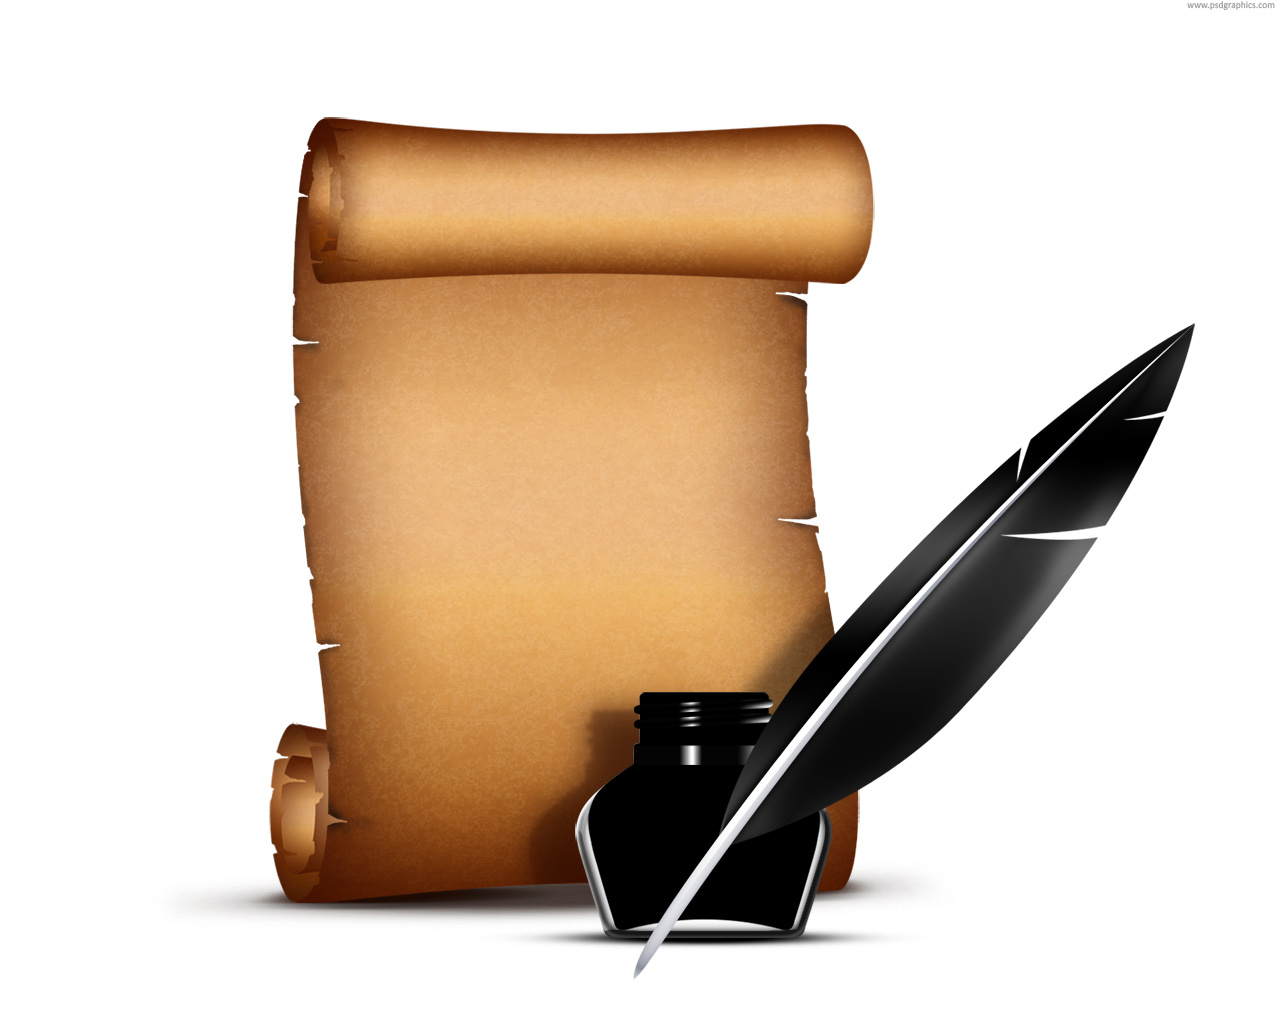 Paper scroll with quill pen (PSD) | PSDGraphics